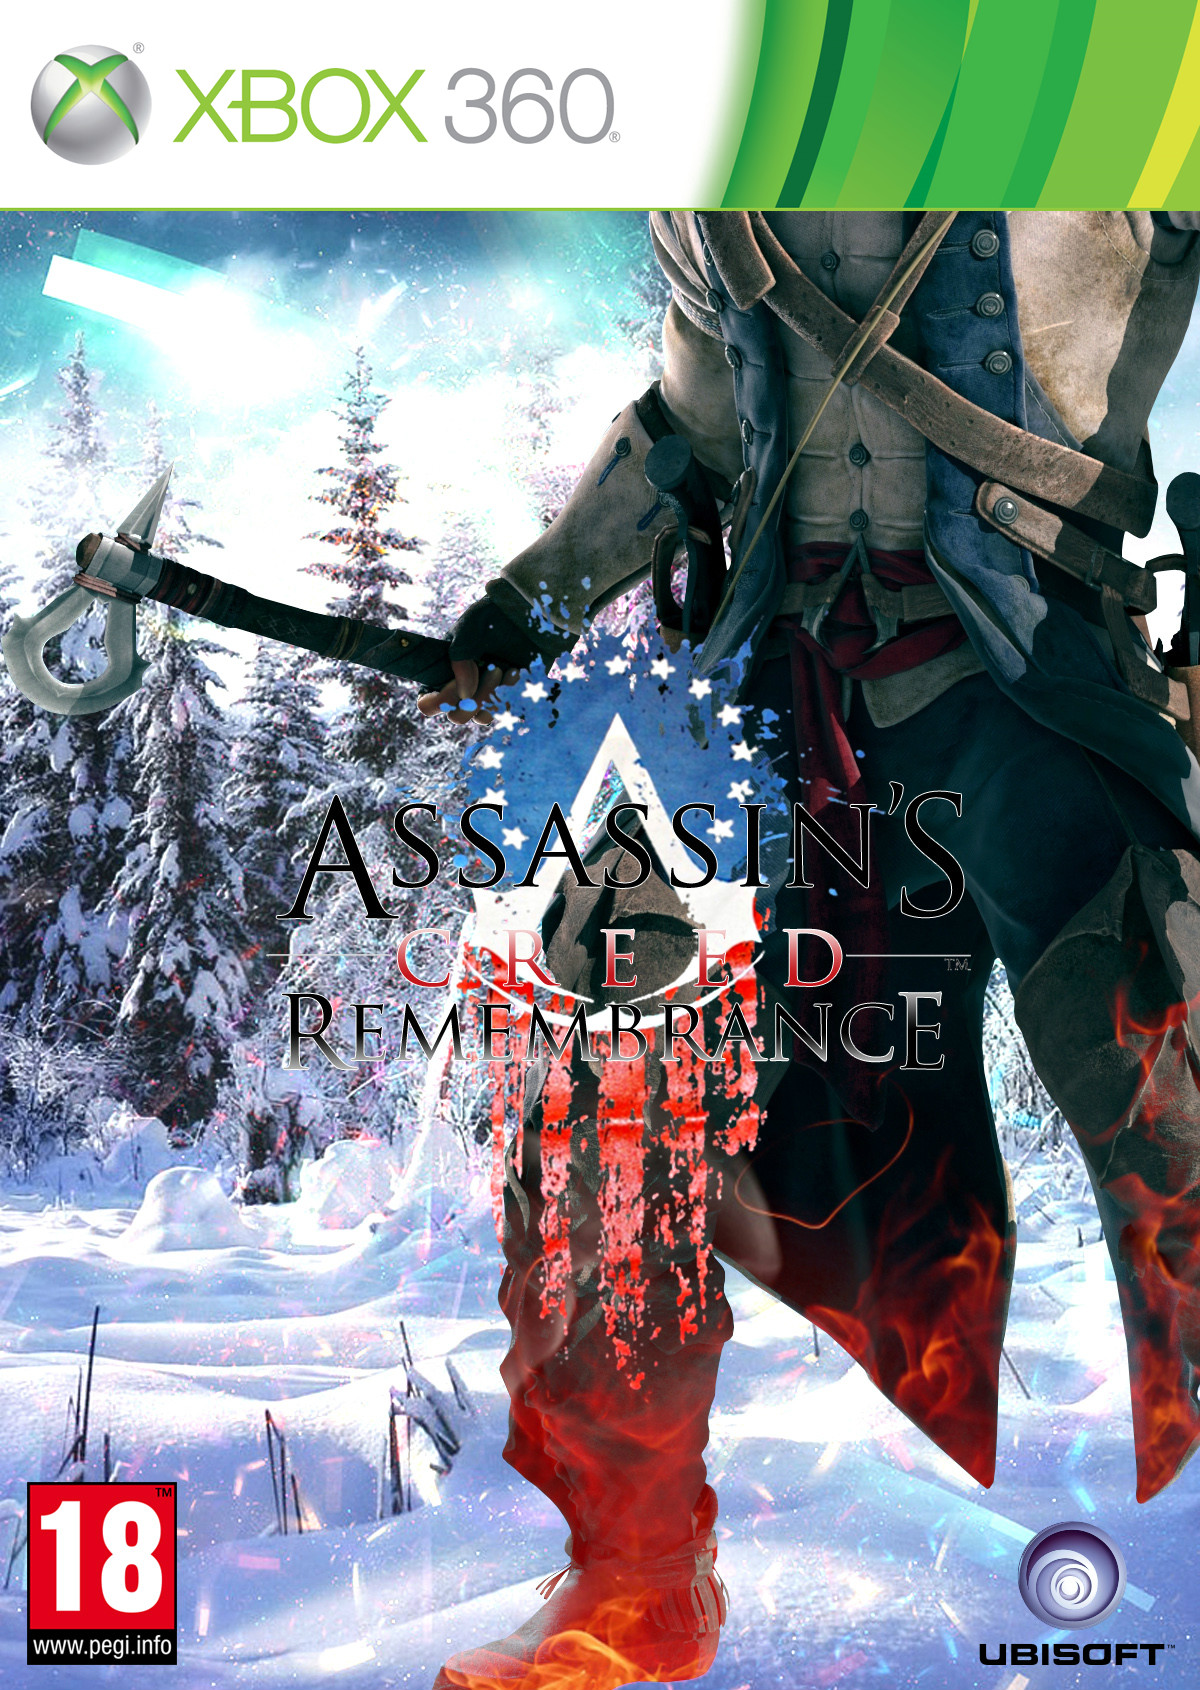 Assassin's Creed Remembrance box cover